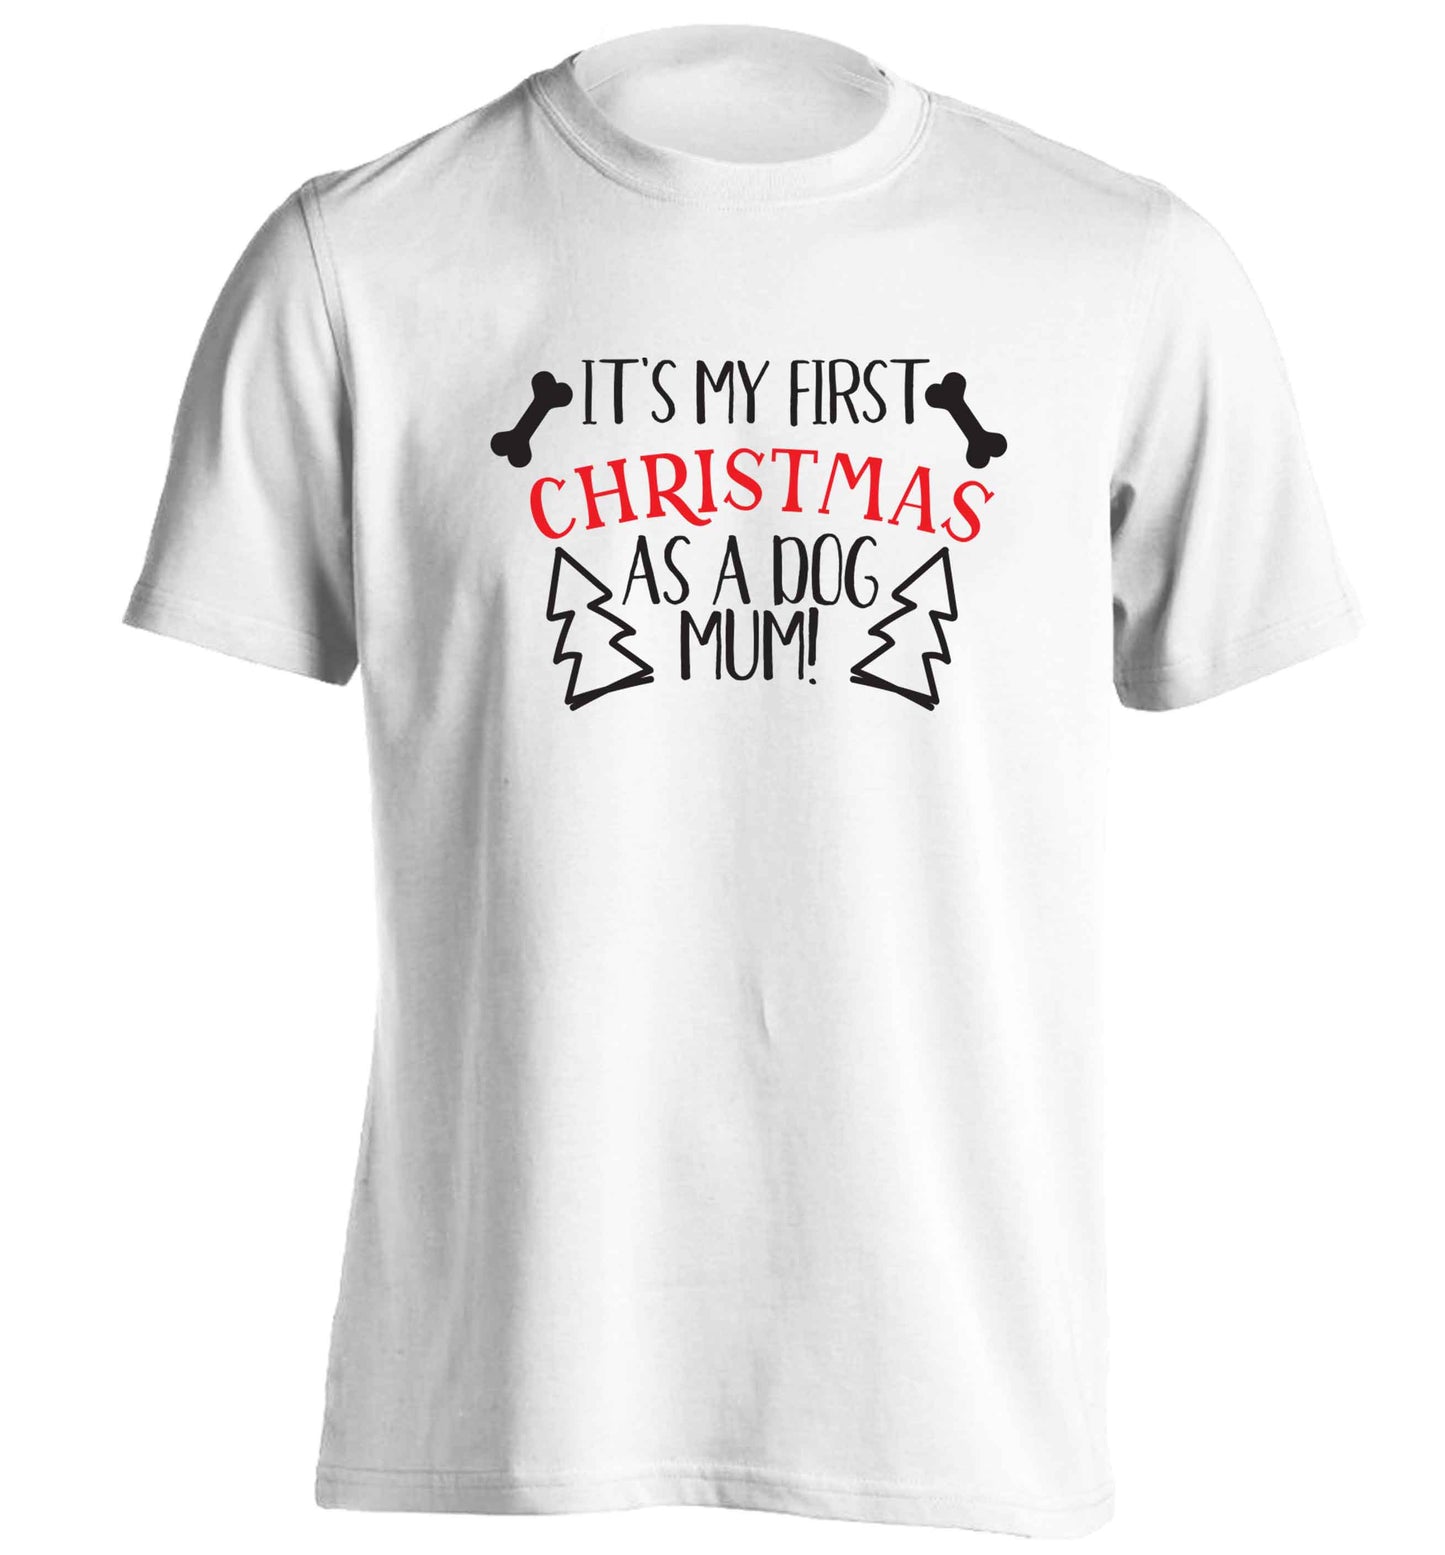 It's my first Christmas as a dog mum! adults unisex white Tshirt 2XL